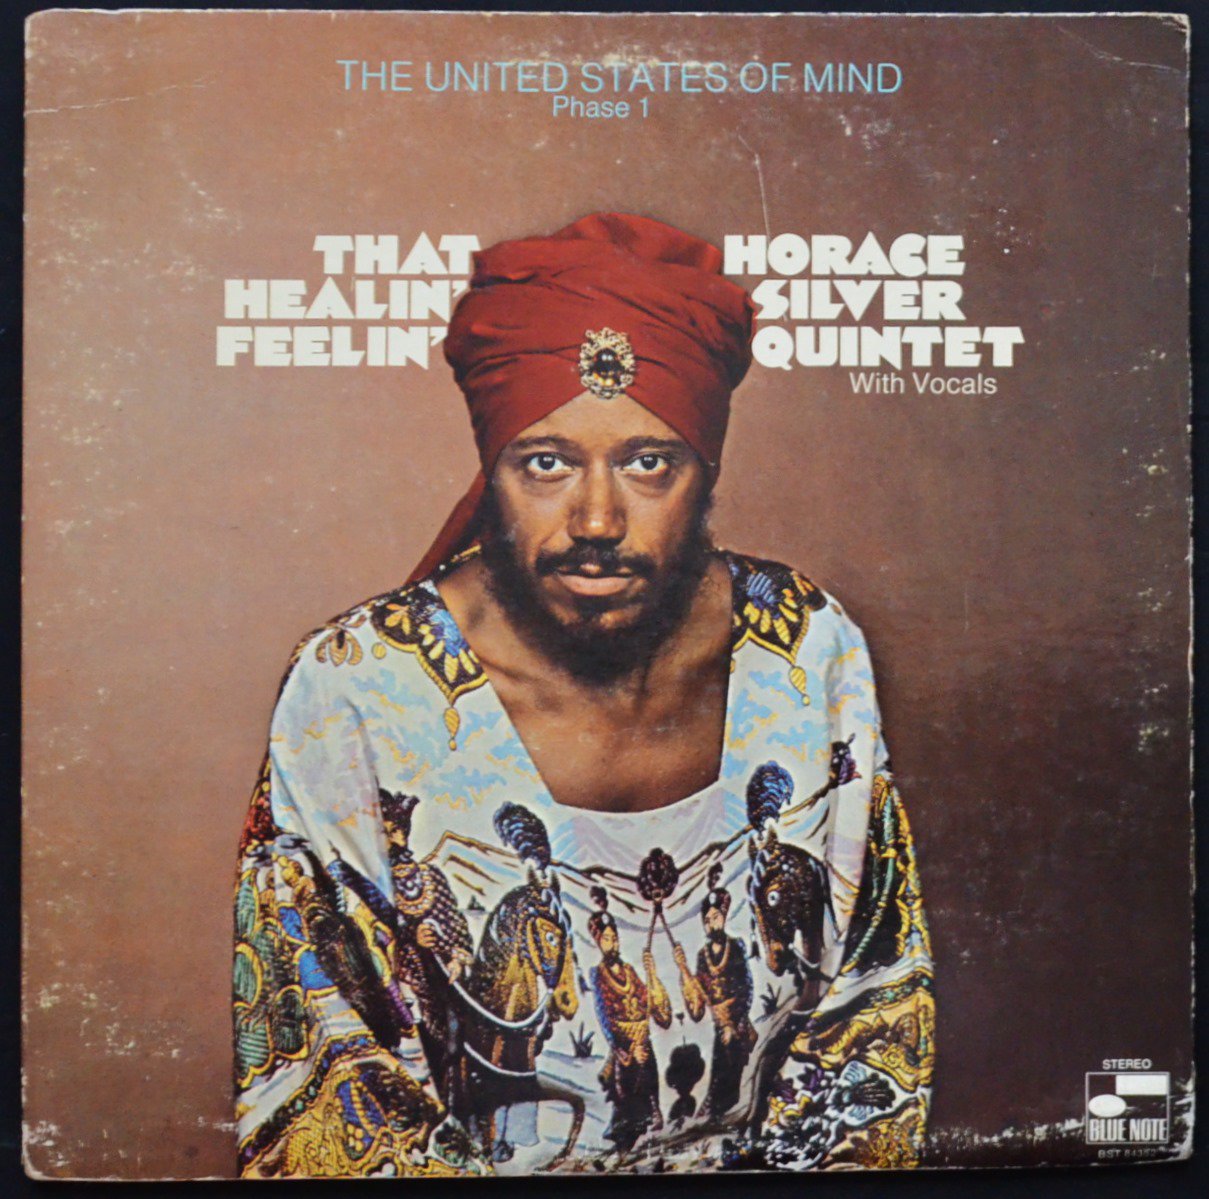 HORACE SILVER QUINTET WITH VOCALS / THAT HEALIN' FEELIN' (THE UNITED STATES OF MIND / PHASE 1) (LP)